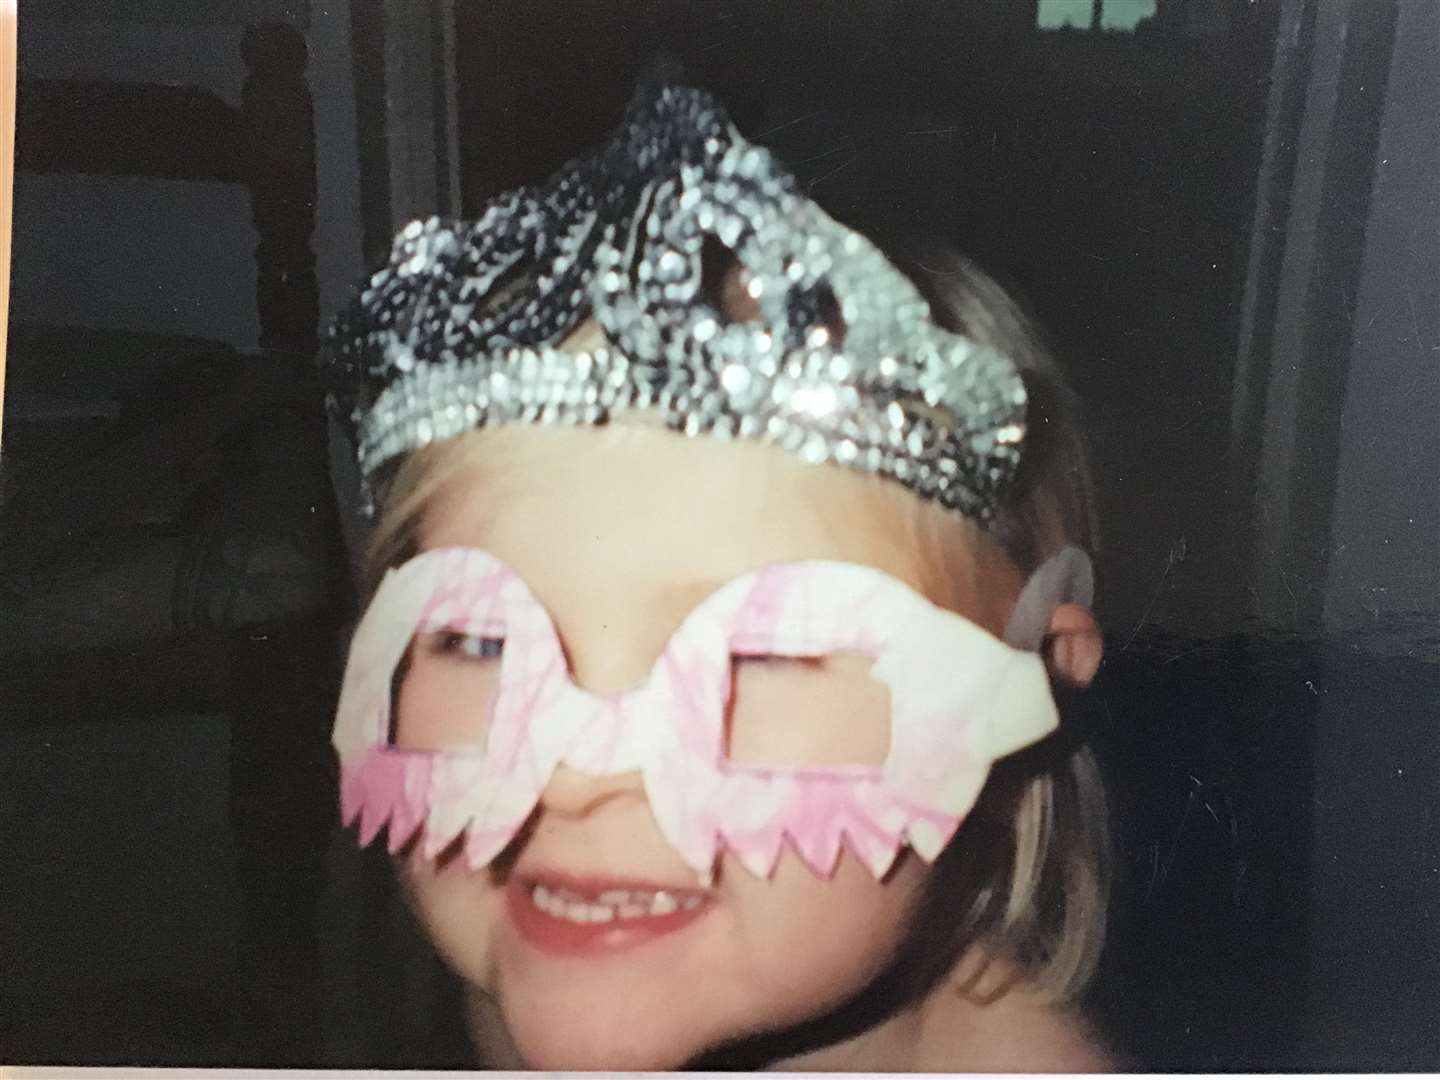 Olivia loved performing from an early age